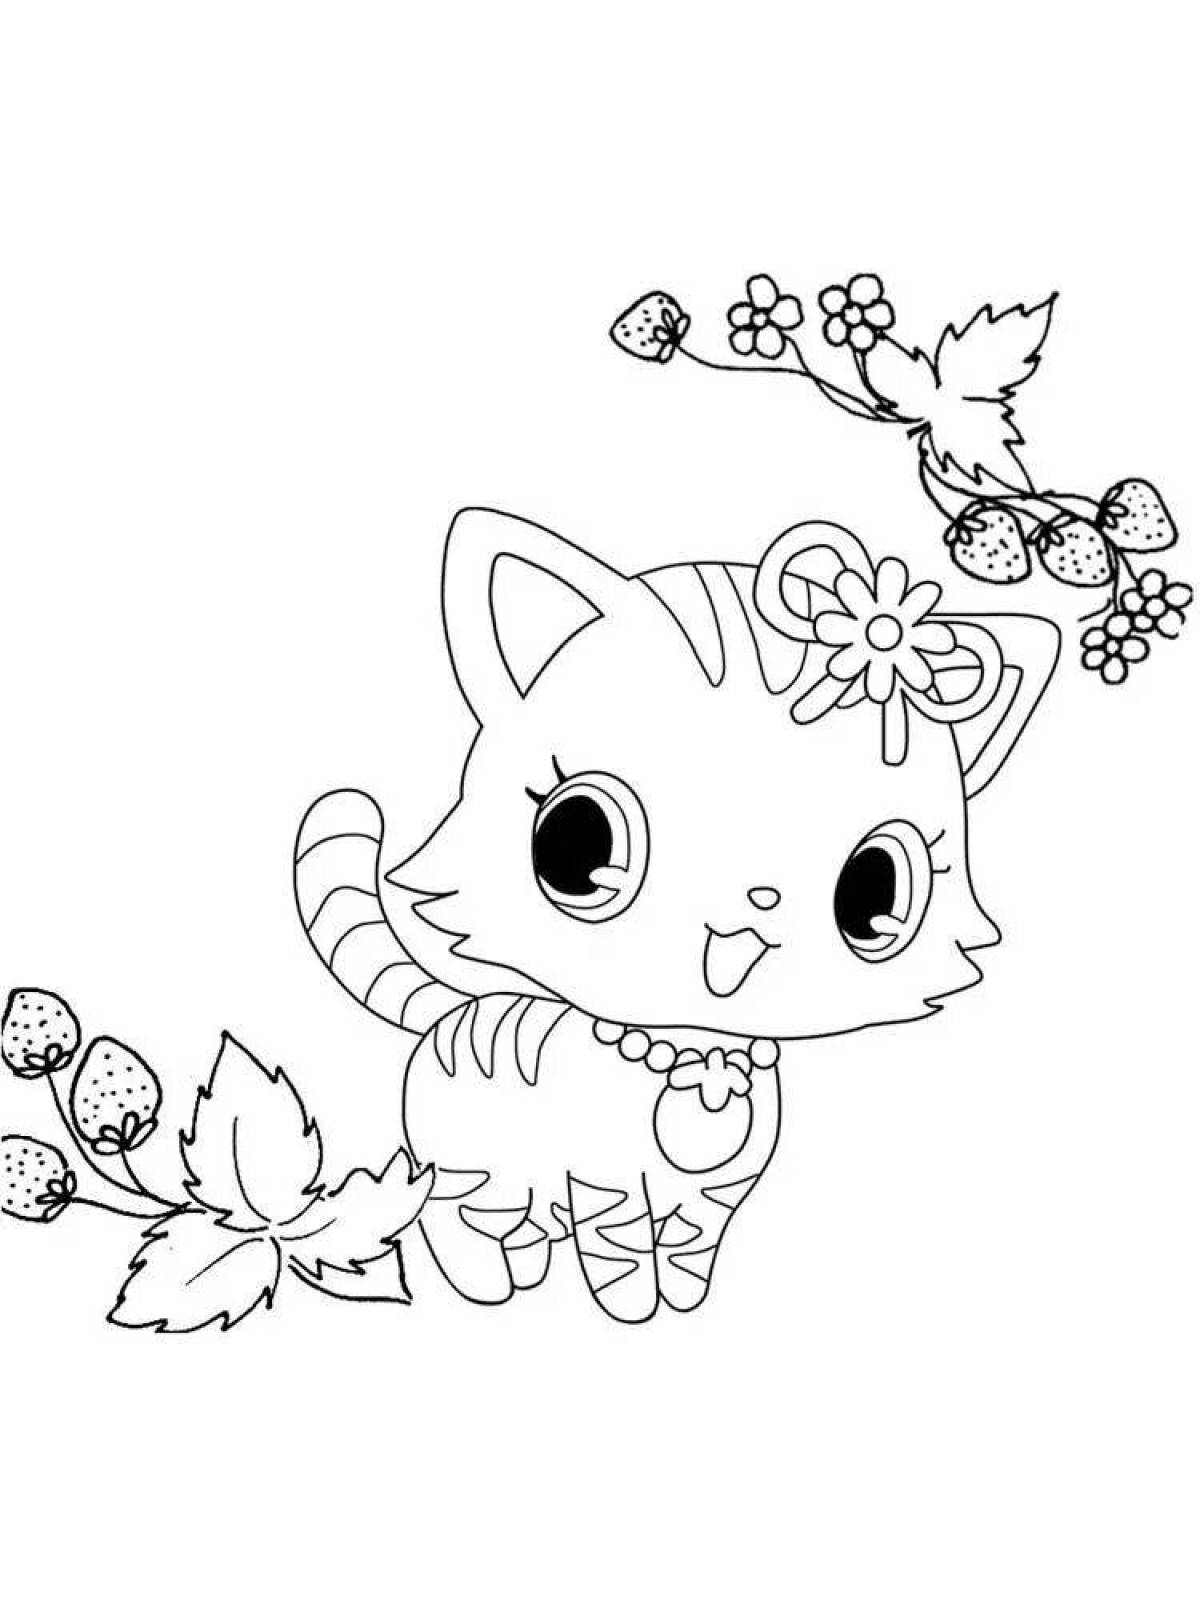 Coloring soft kittens